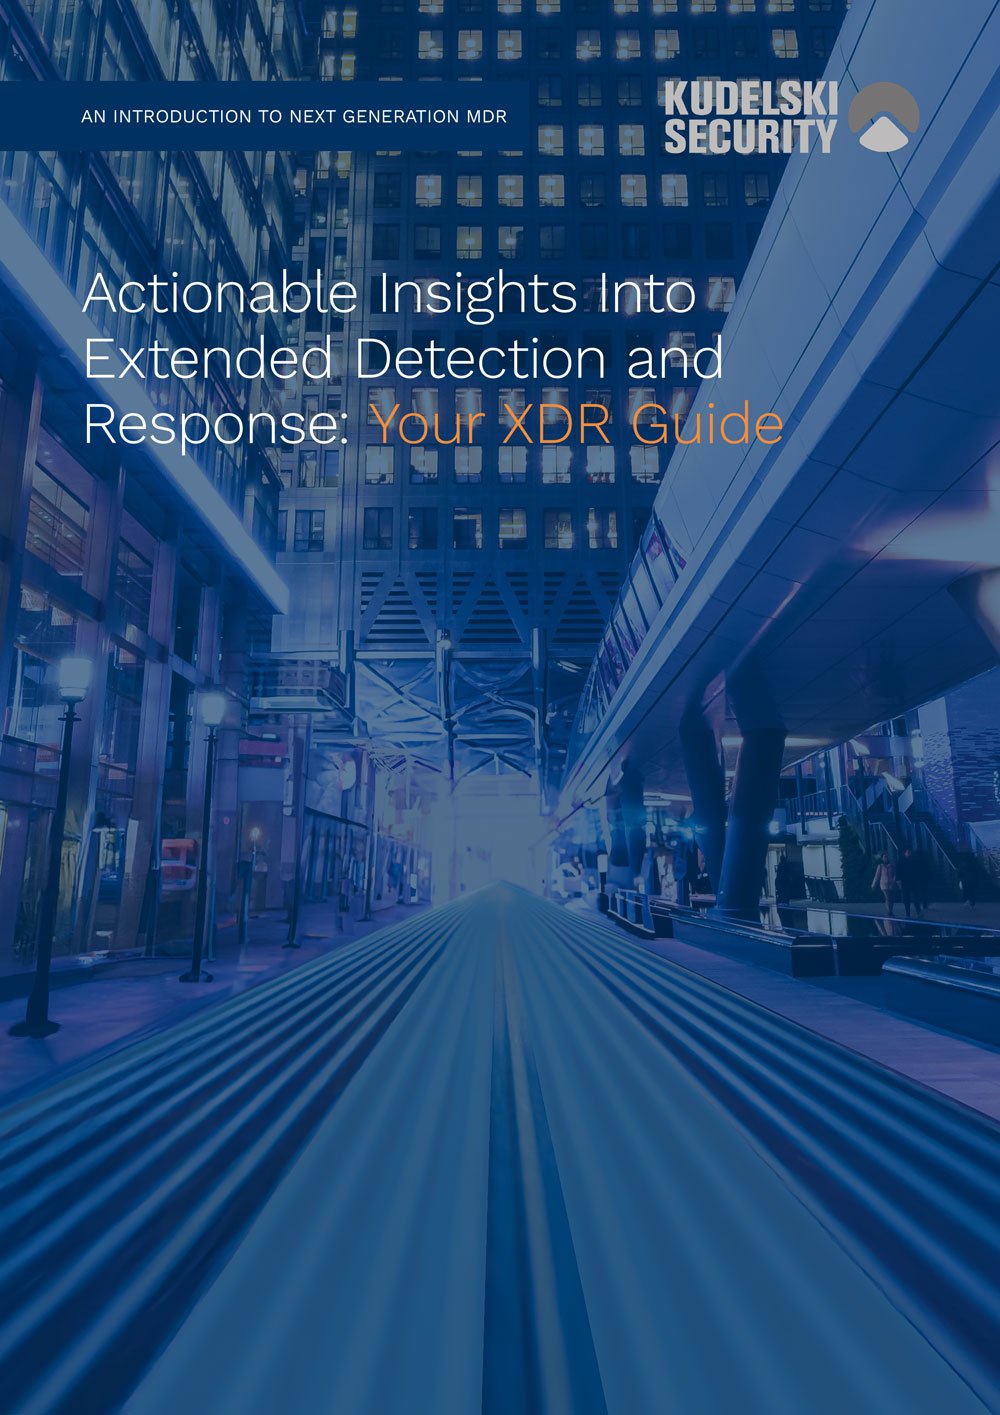 WHITEPAPER-INNOVATION-INSIGHT-INTO-EXTENDED-DETECTION-AND-RESPONSE-XDR-GUIDE-1